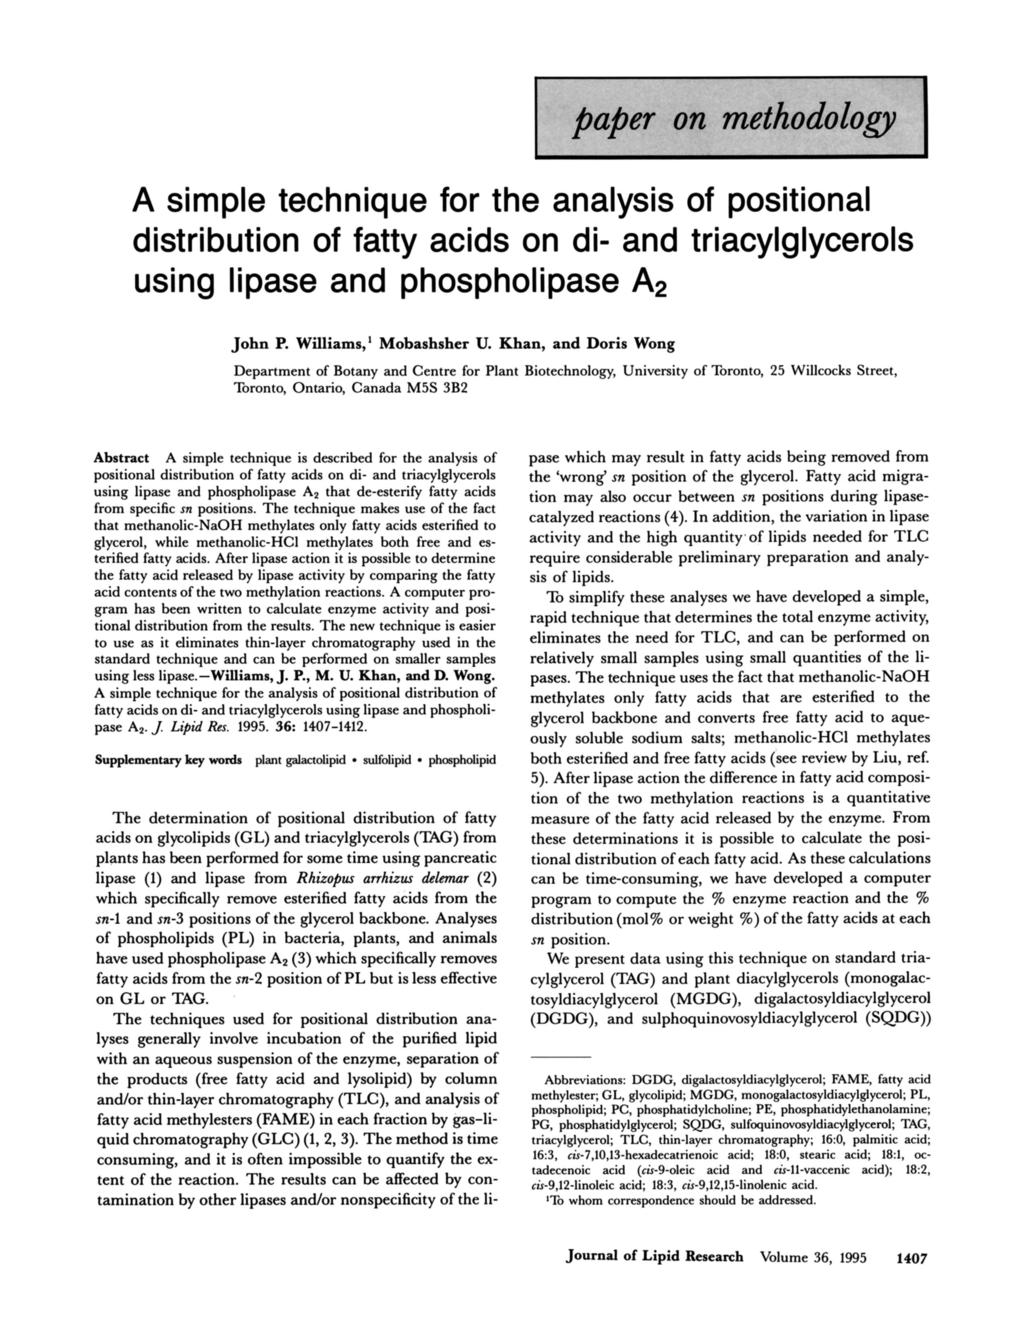 paper on methodology A simple technique for the analysis of positional distribution of fatty acids on di- and triacylglycerols using lipase and phospholipase A2 John P. Williams,' Mobashsher U.